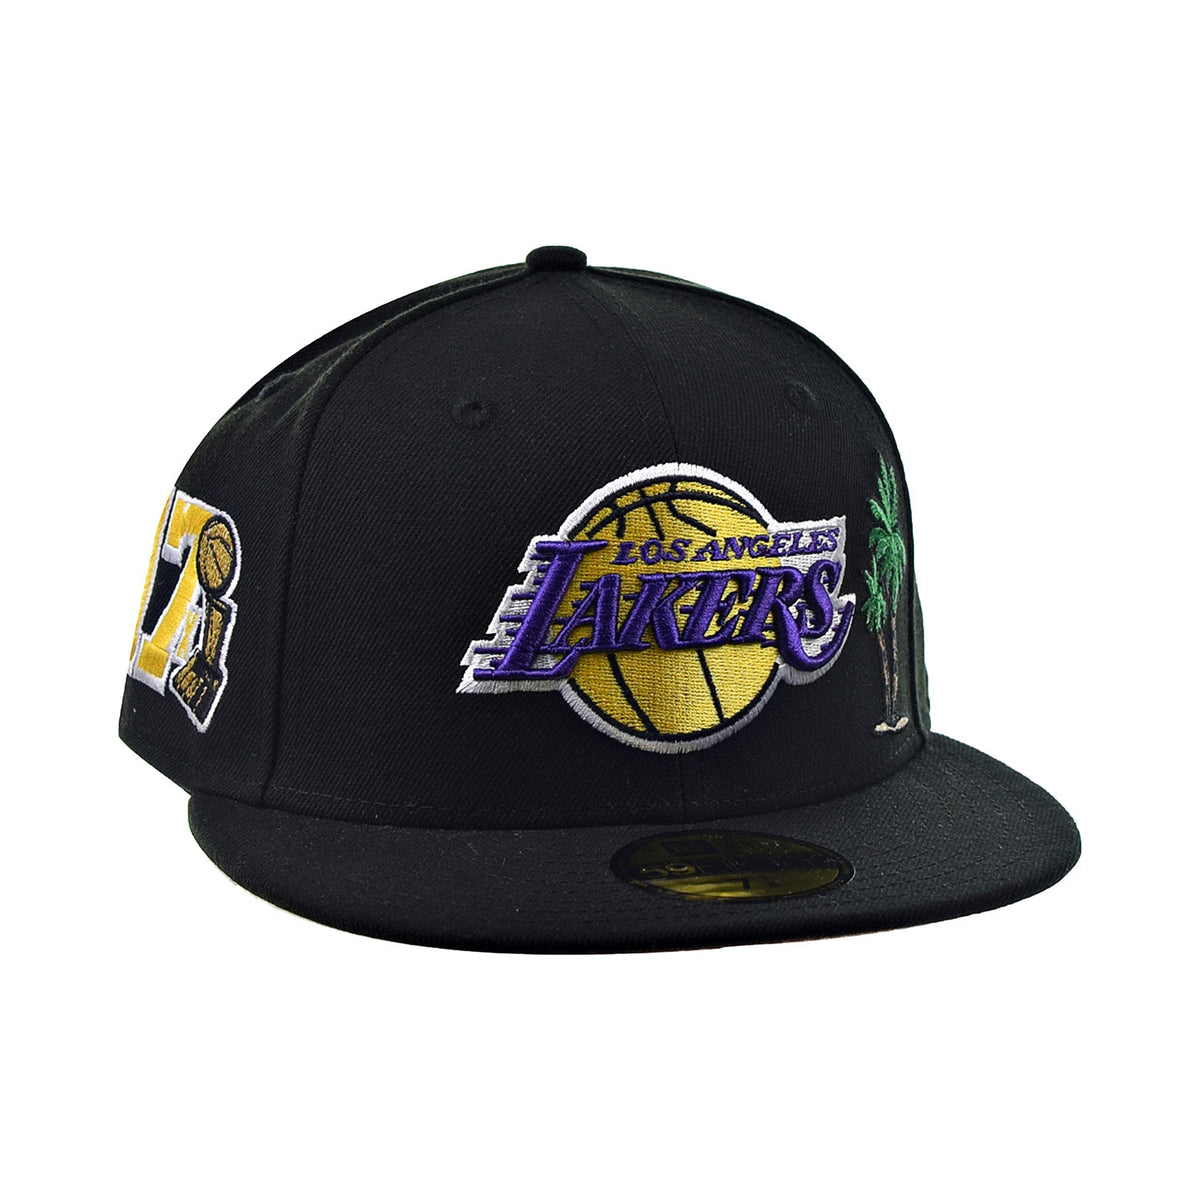 lakers black fitted hat